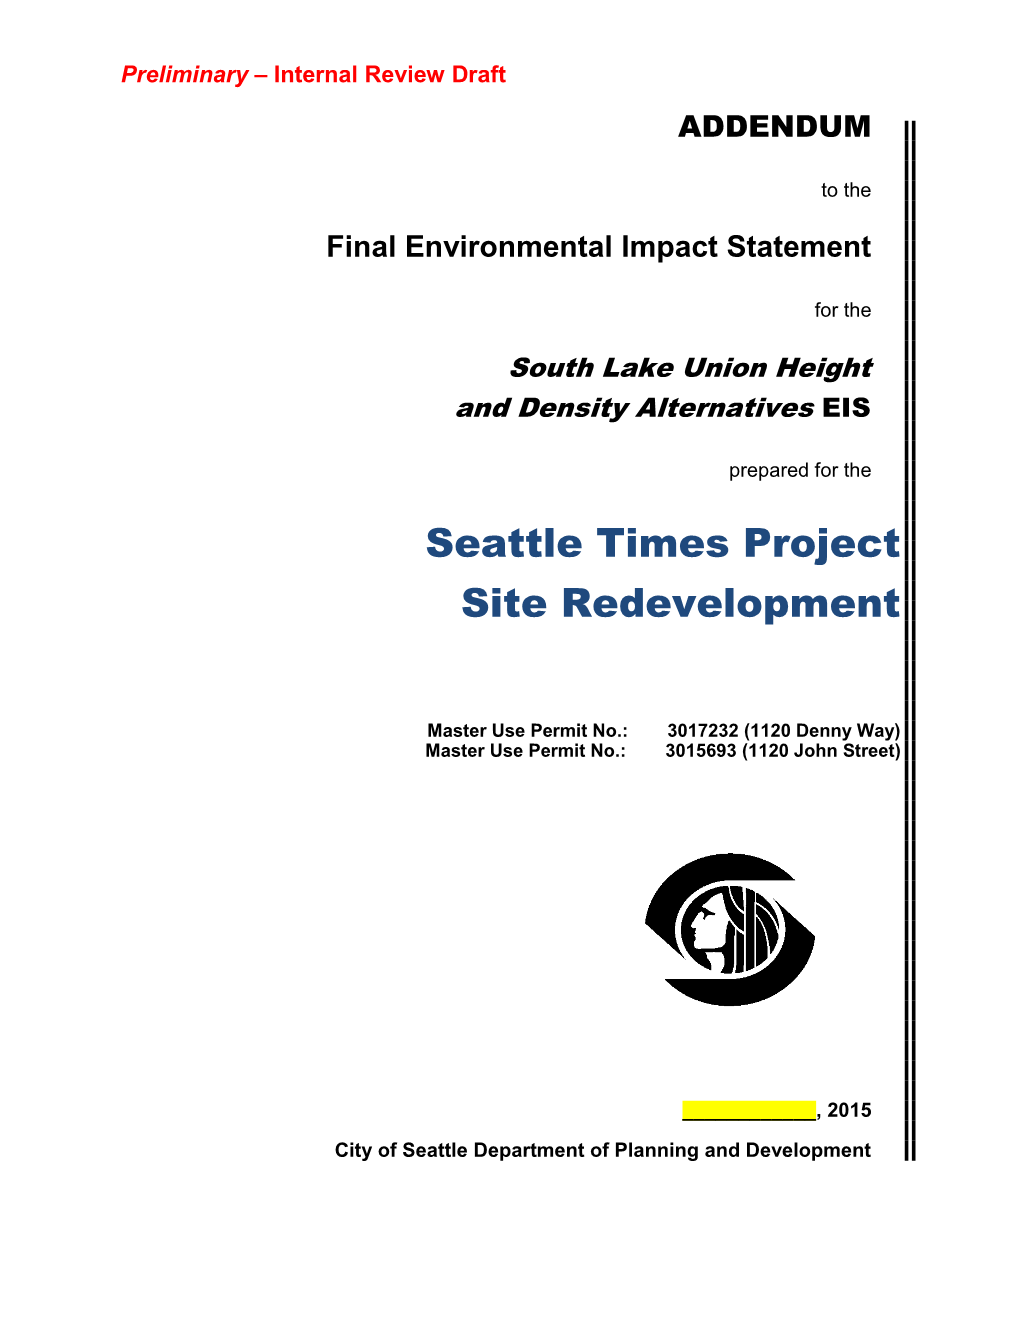 Seattle Times Project Site Redevelopment